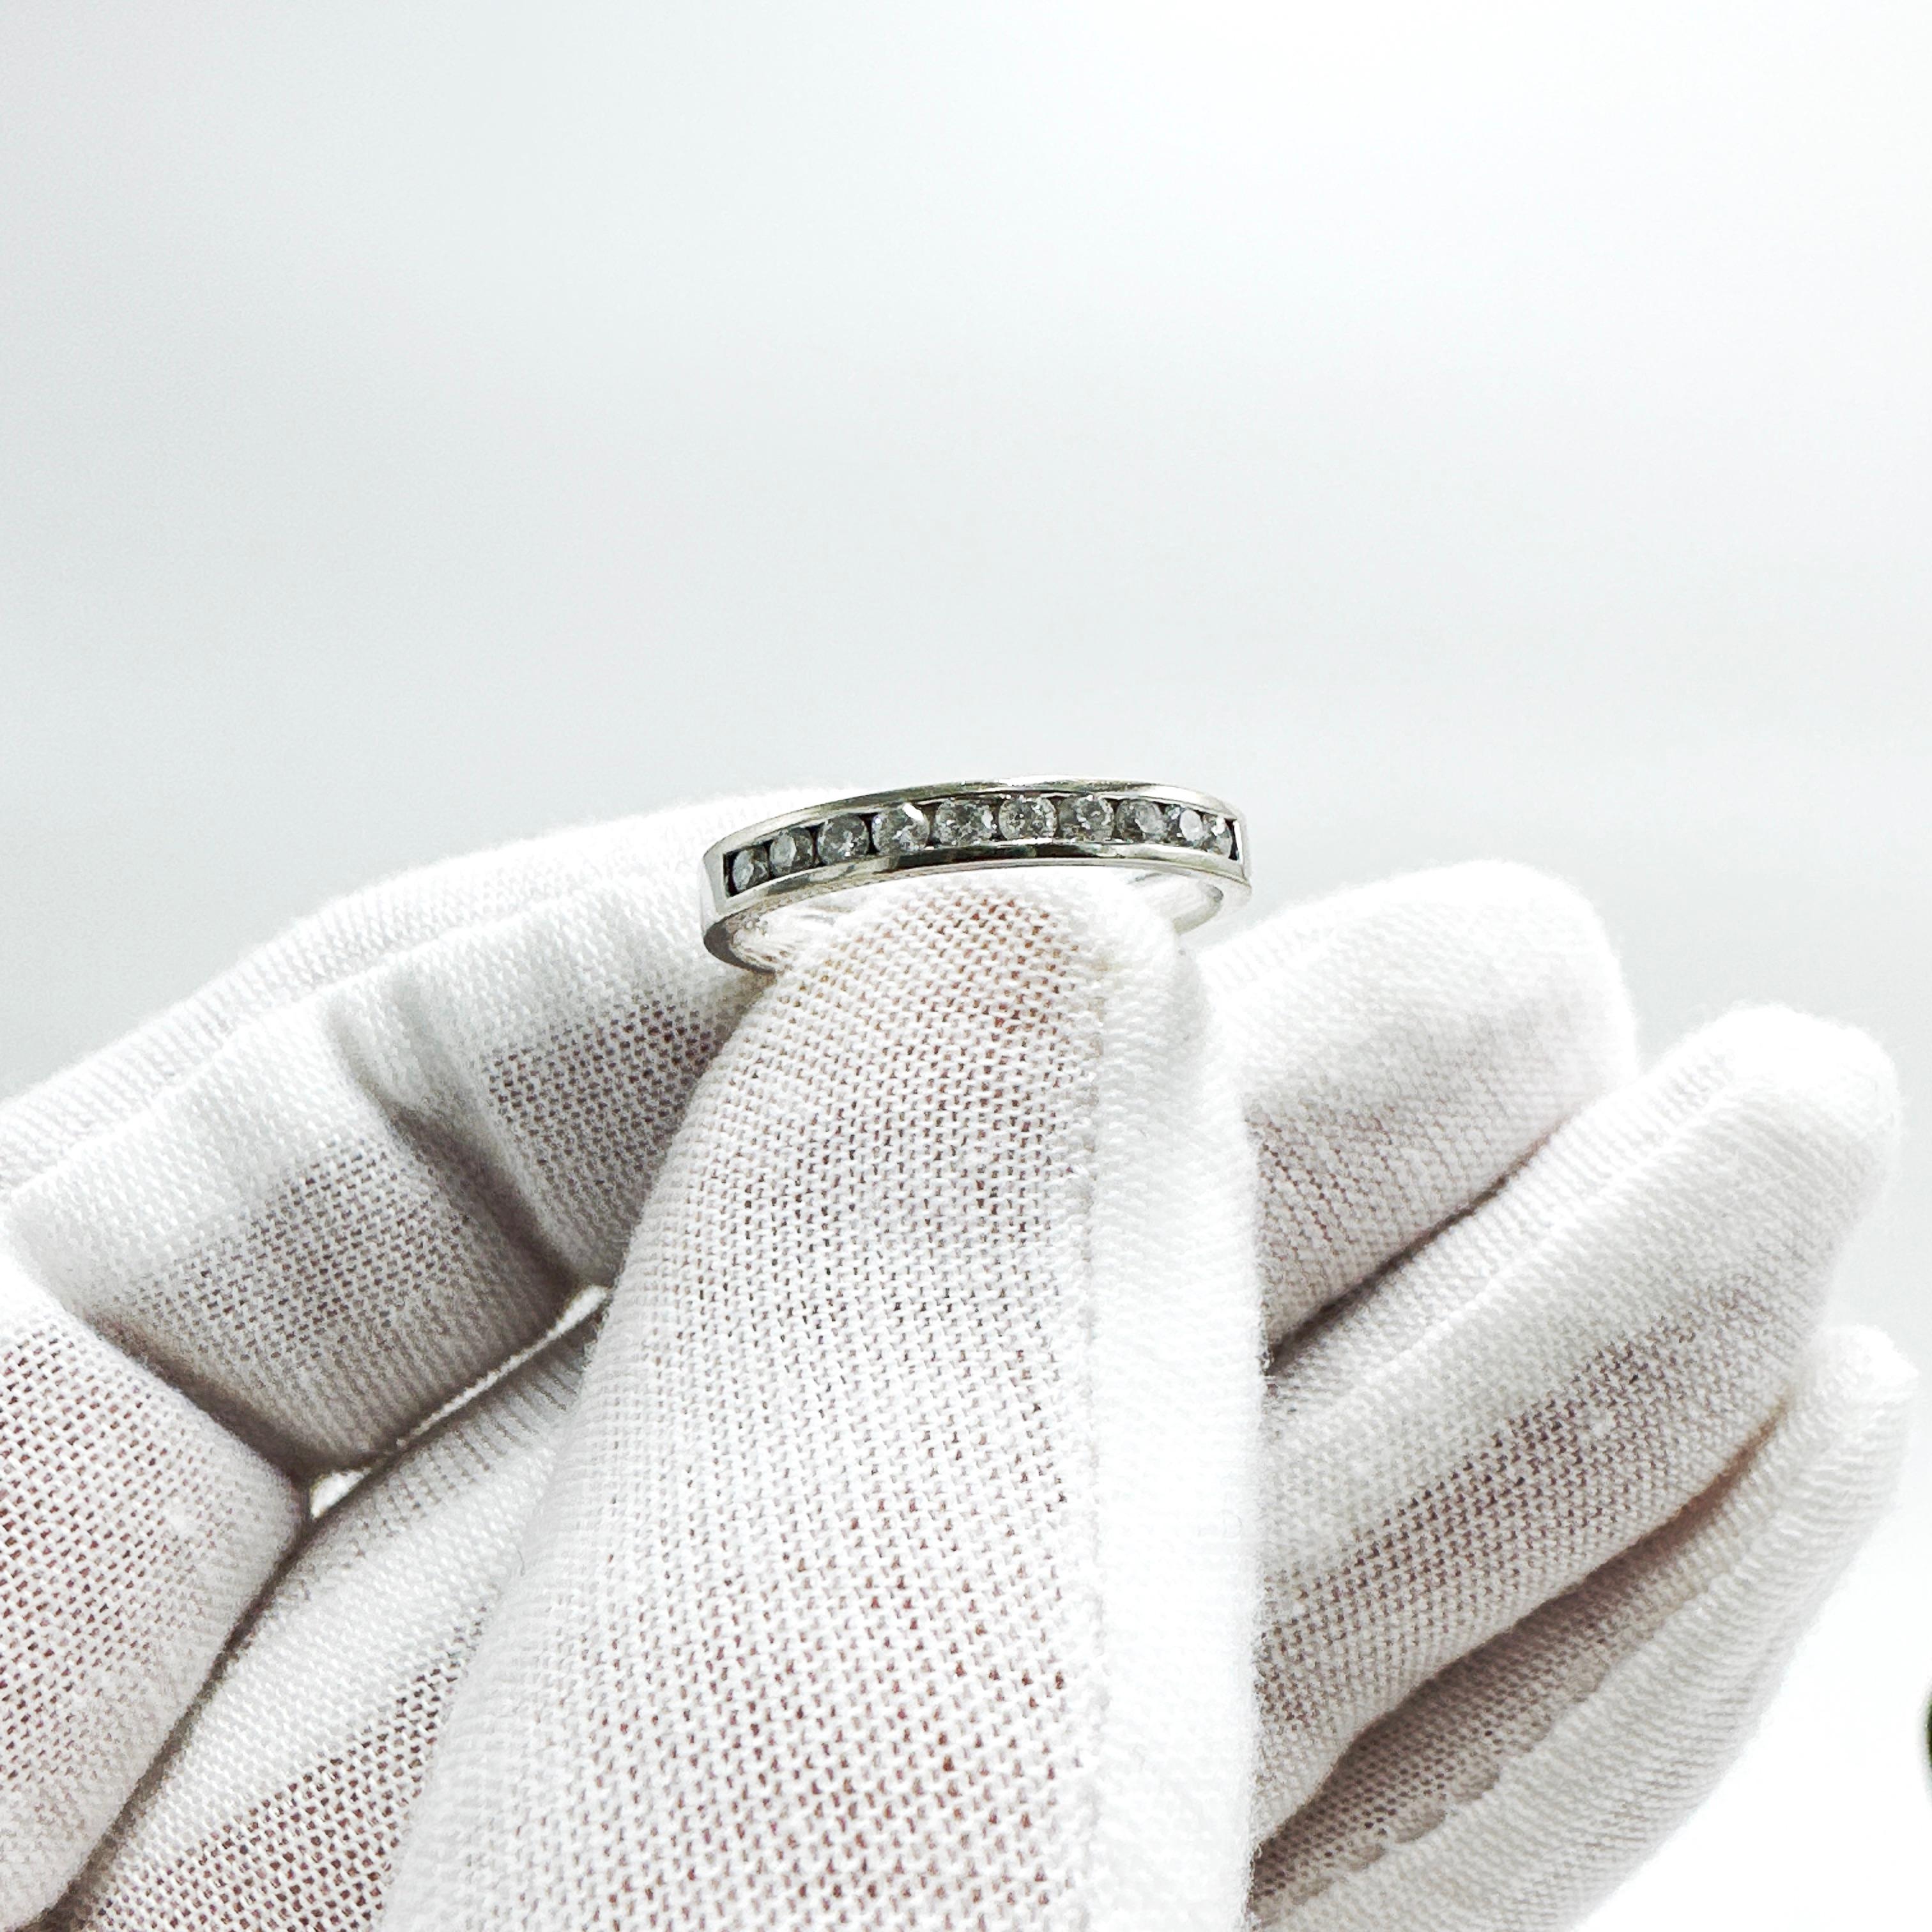 Here is a beautiful 14k White Gold Natural Diamond 1/2 Eternity Ring.

This ring features 10 x 0.03ct natural round brilliant diamonds each measuring approx. 1.90mm in diameter. Diamonds are I-1 clarity, H-I colour with good polish, symmetry and